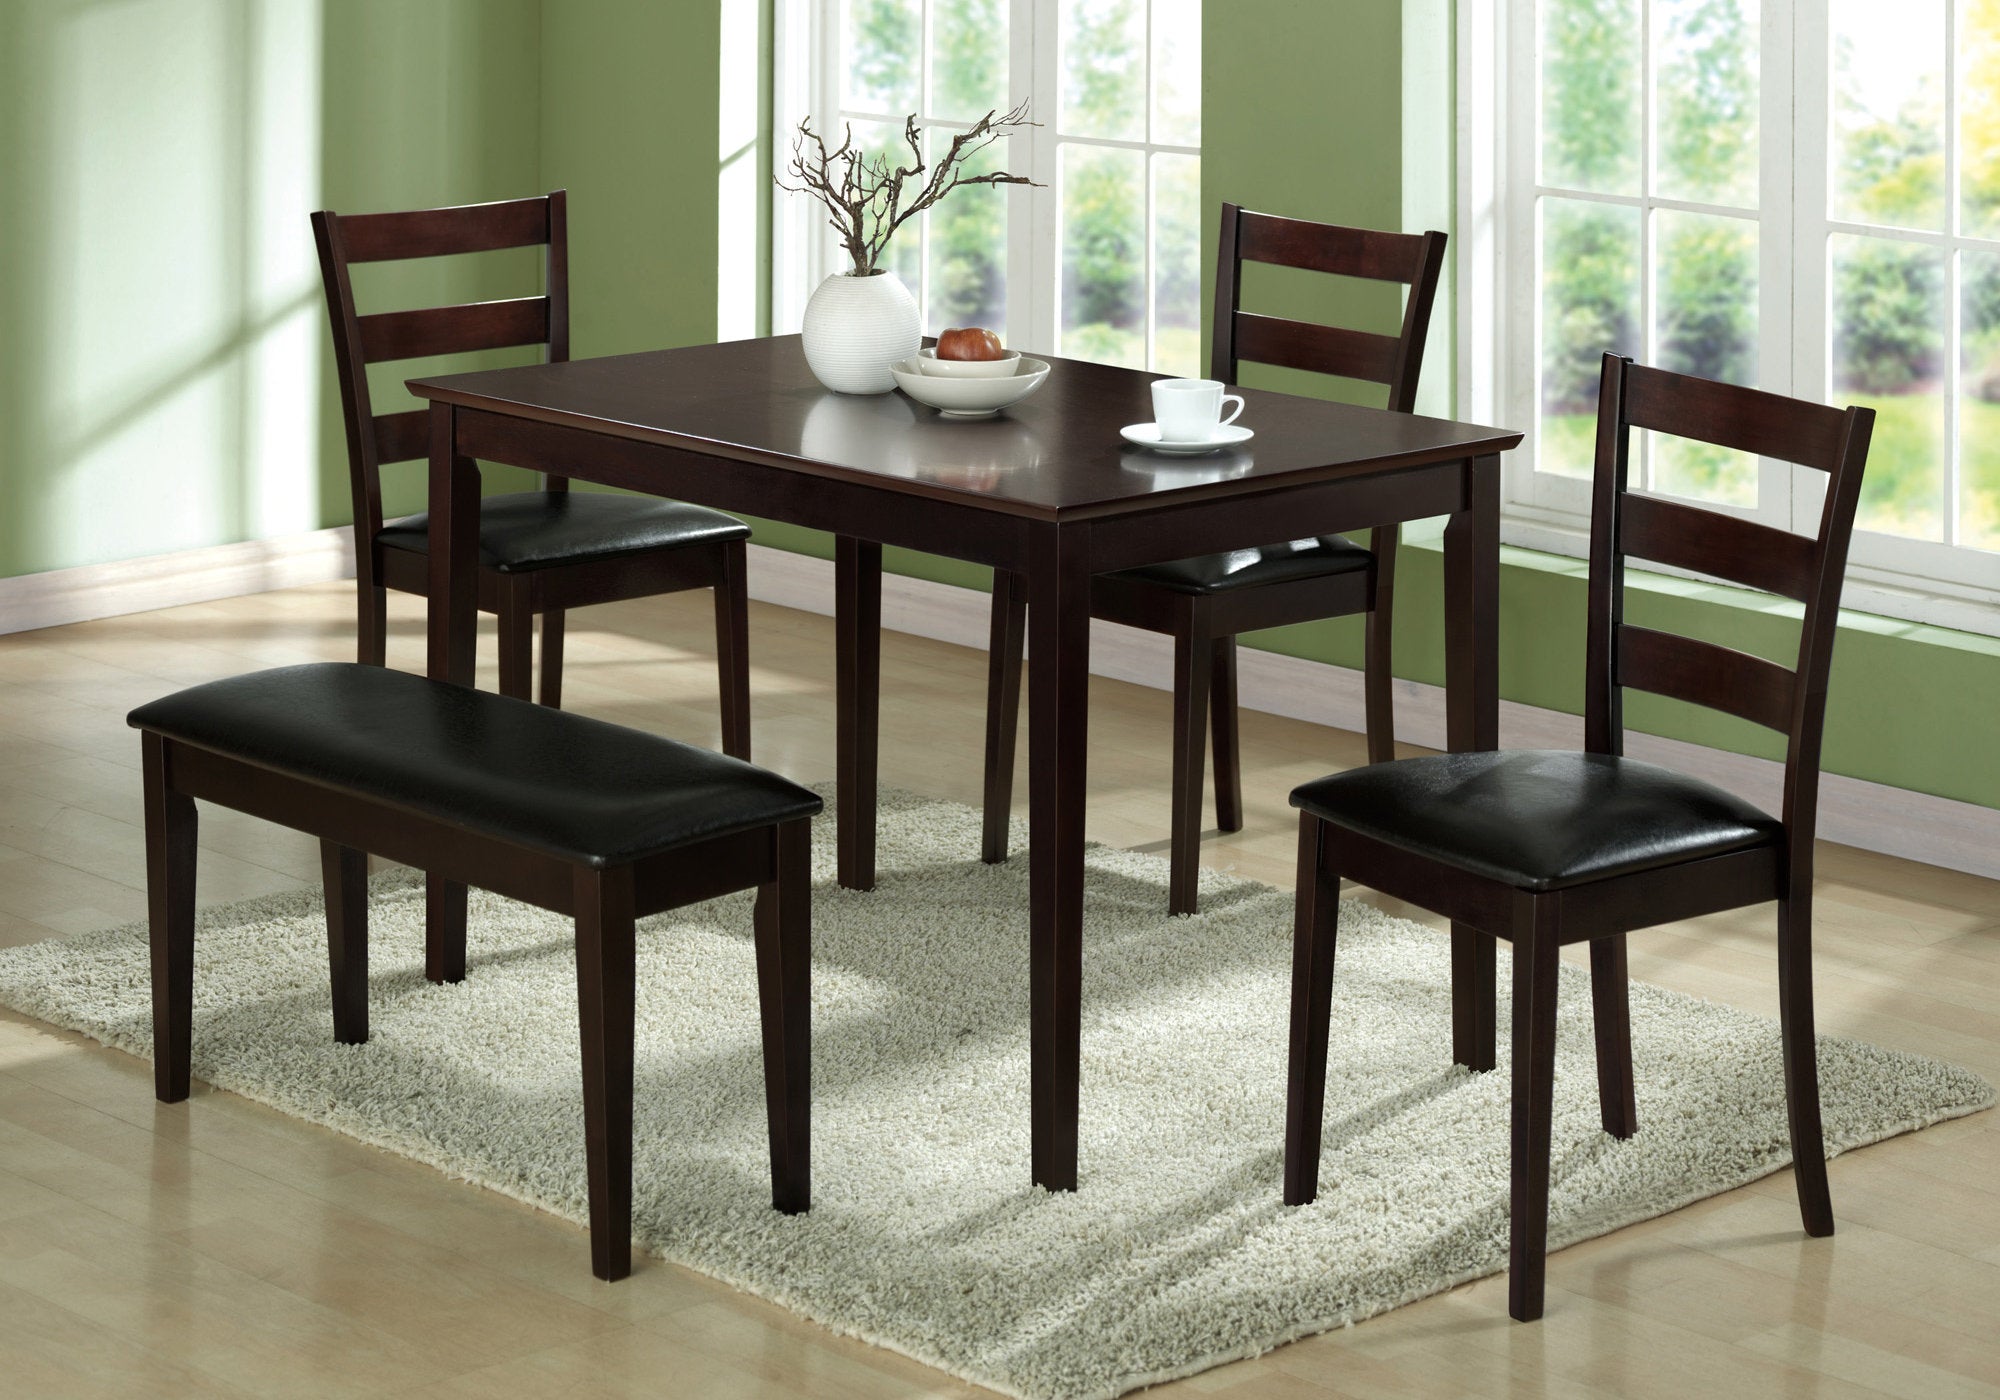 Luxury Modern Home Dining Table With Expresso Bench and 3 Dining Chairs (5 Pcs)